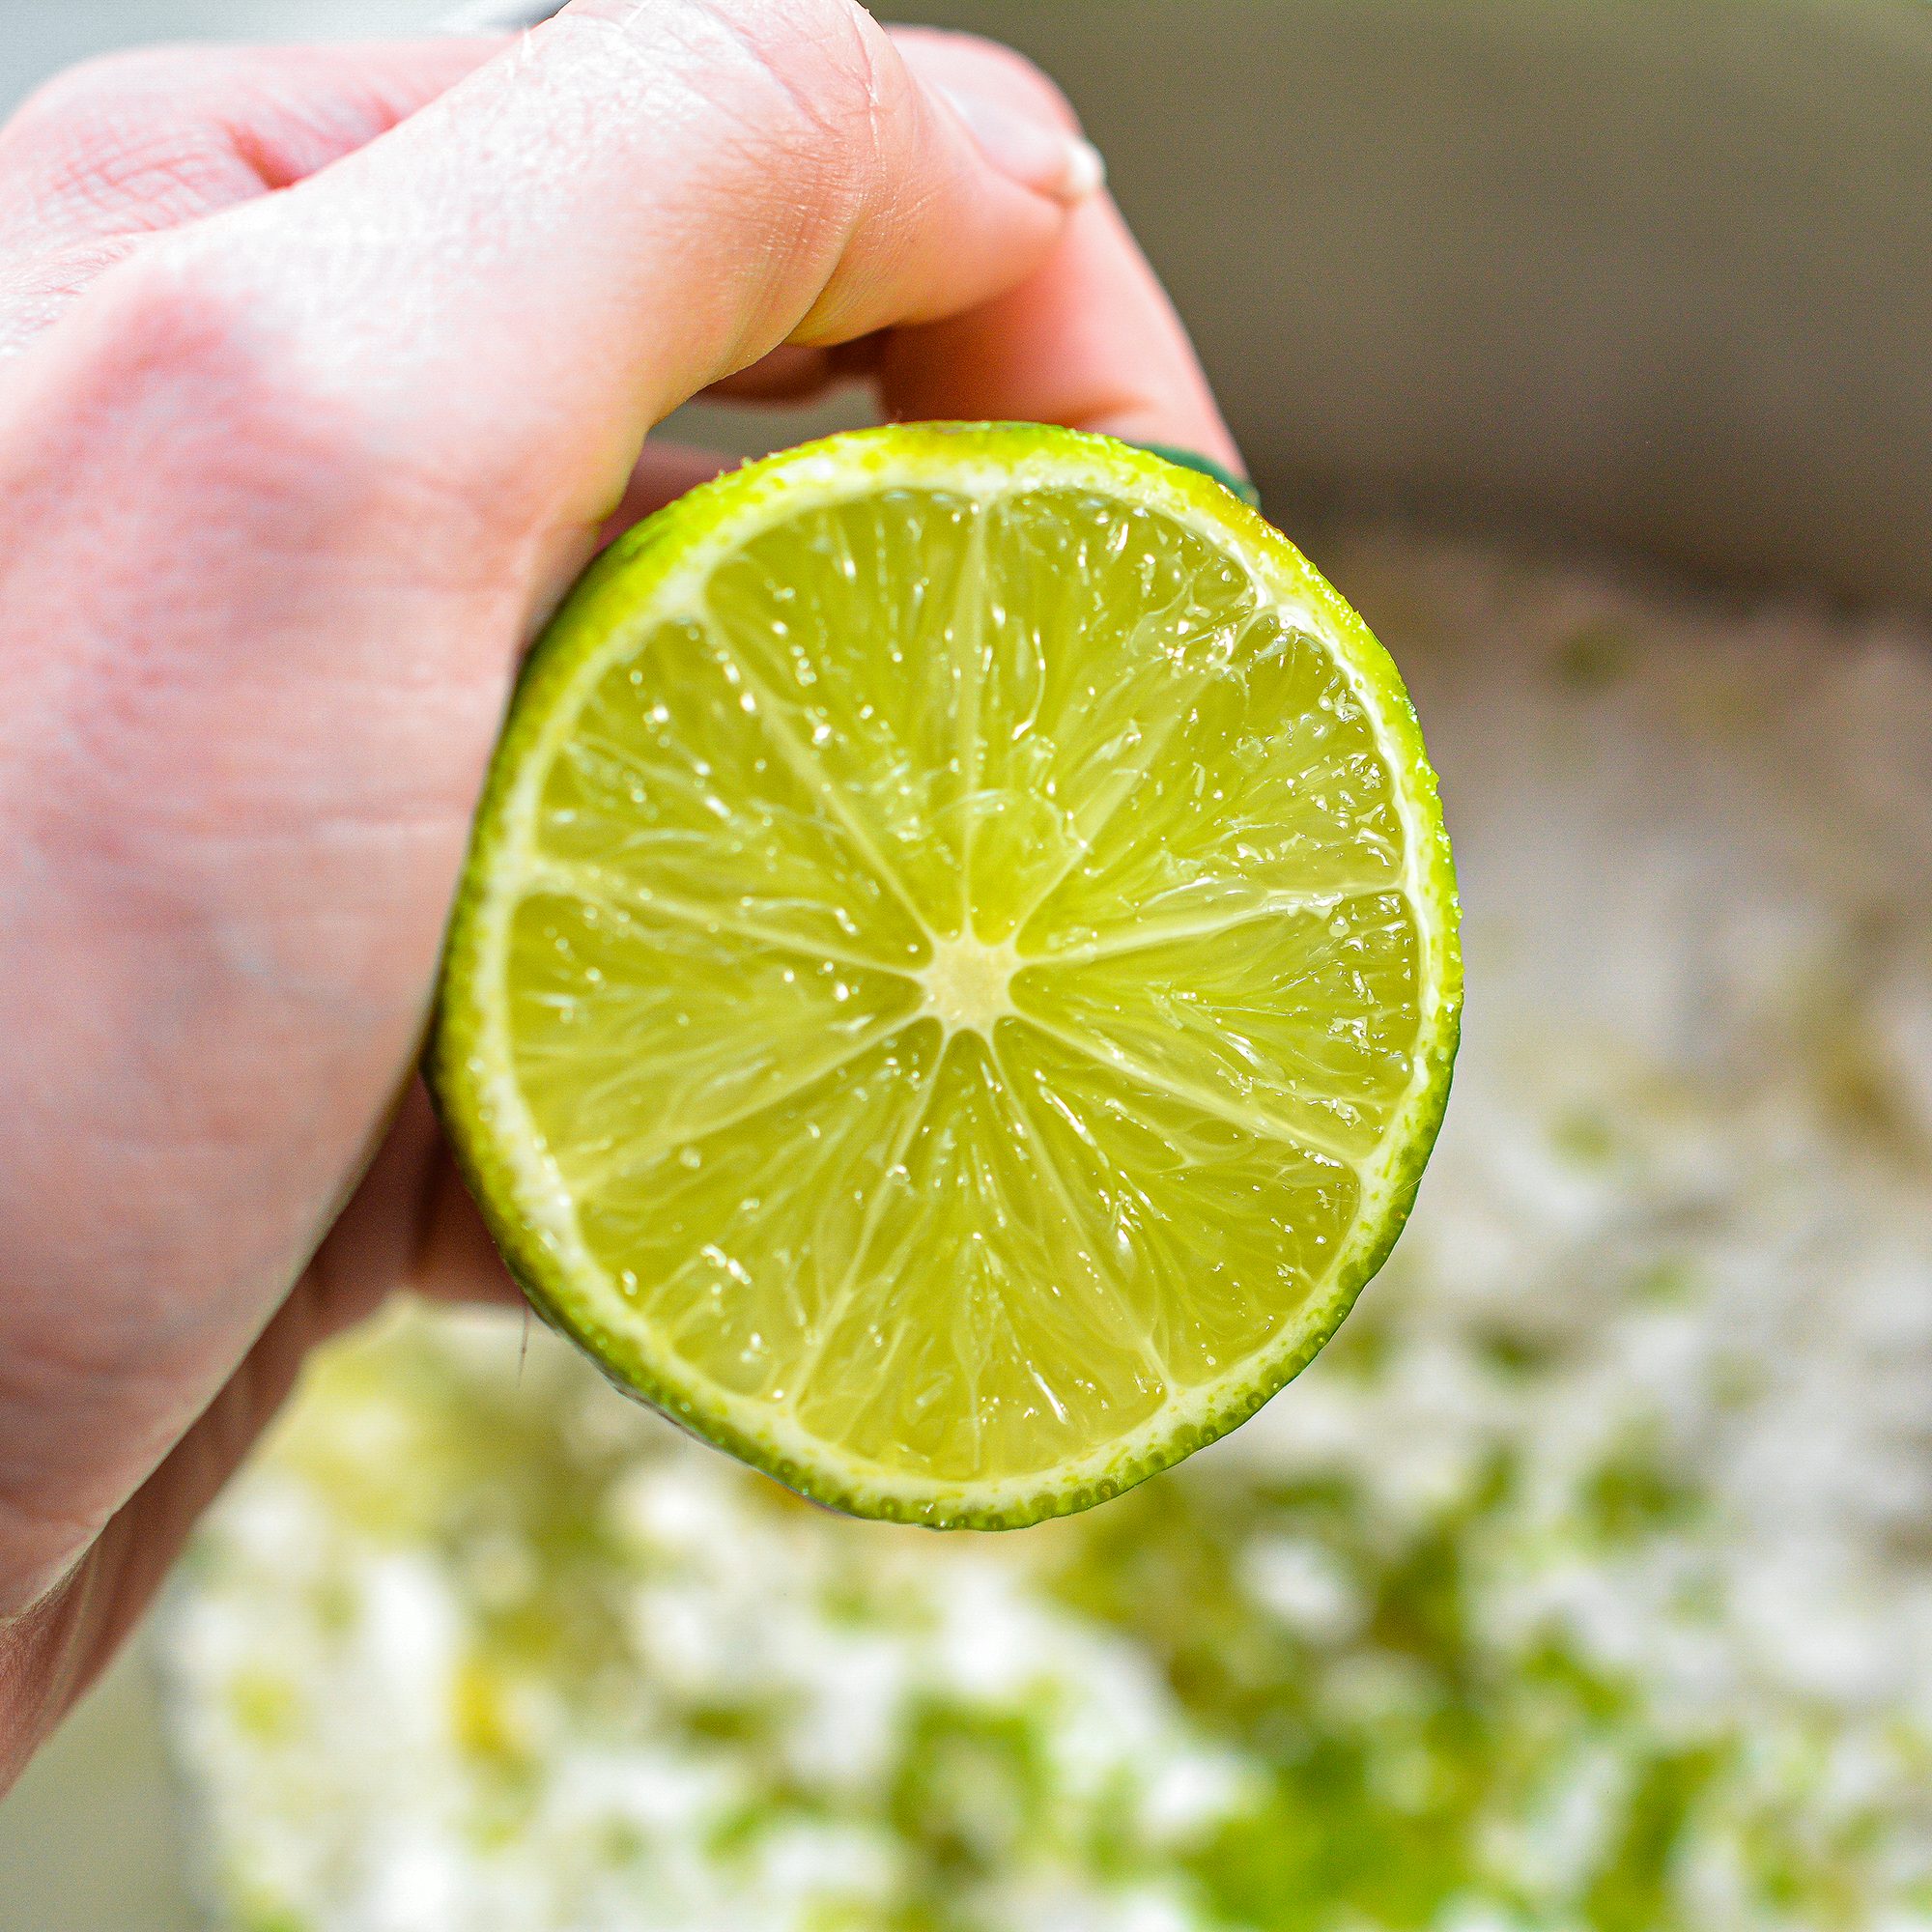 Adding the lime juice.